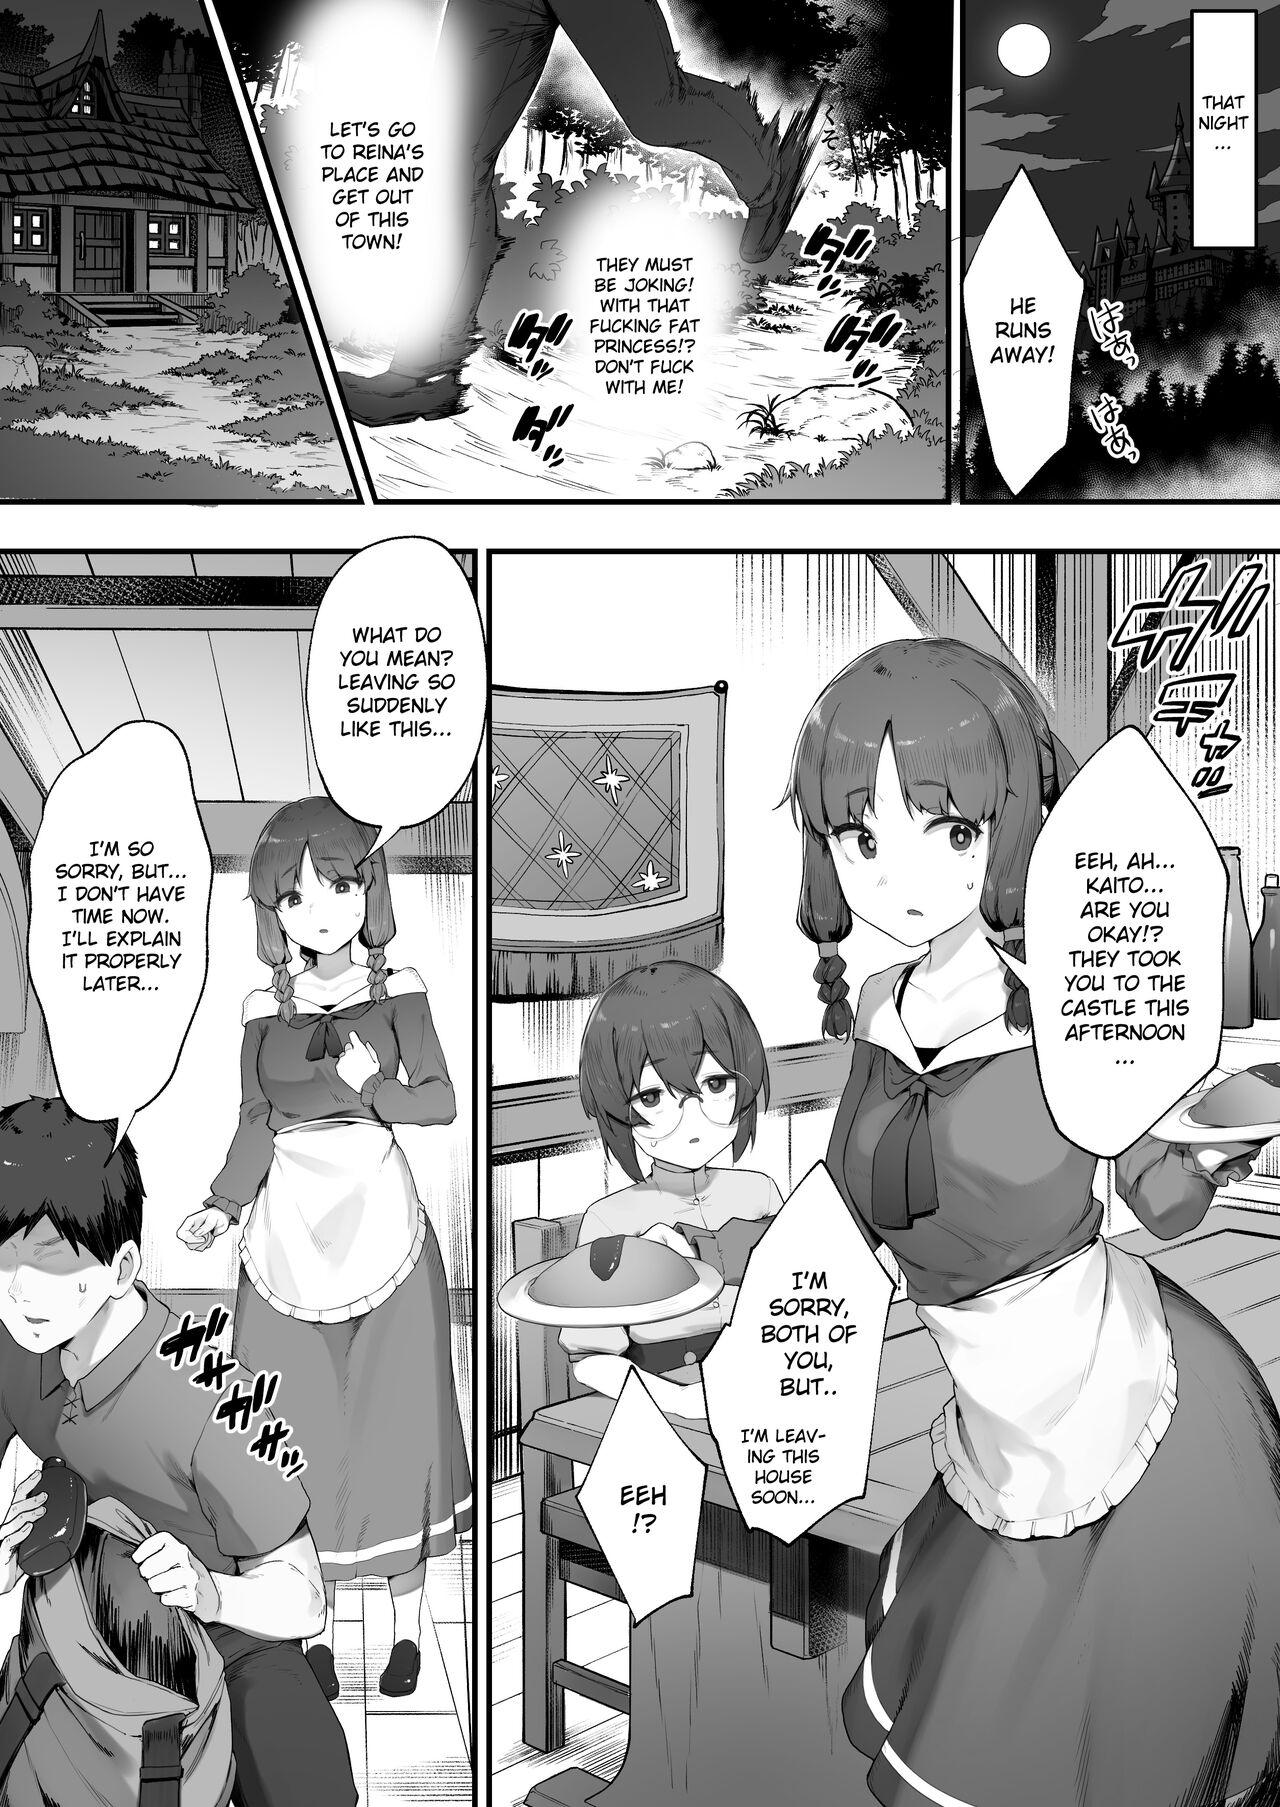 Cougar Oujo no Meirei de Stalker to Kekkon Saserareru Hanashi 1 | A story about being married to a stalker by the order of a princess 1 - Original Flaquita - Page 6